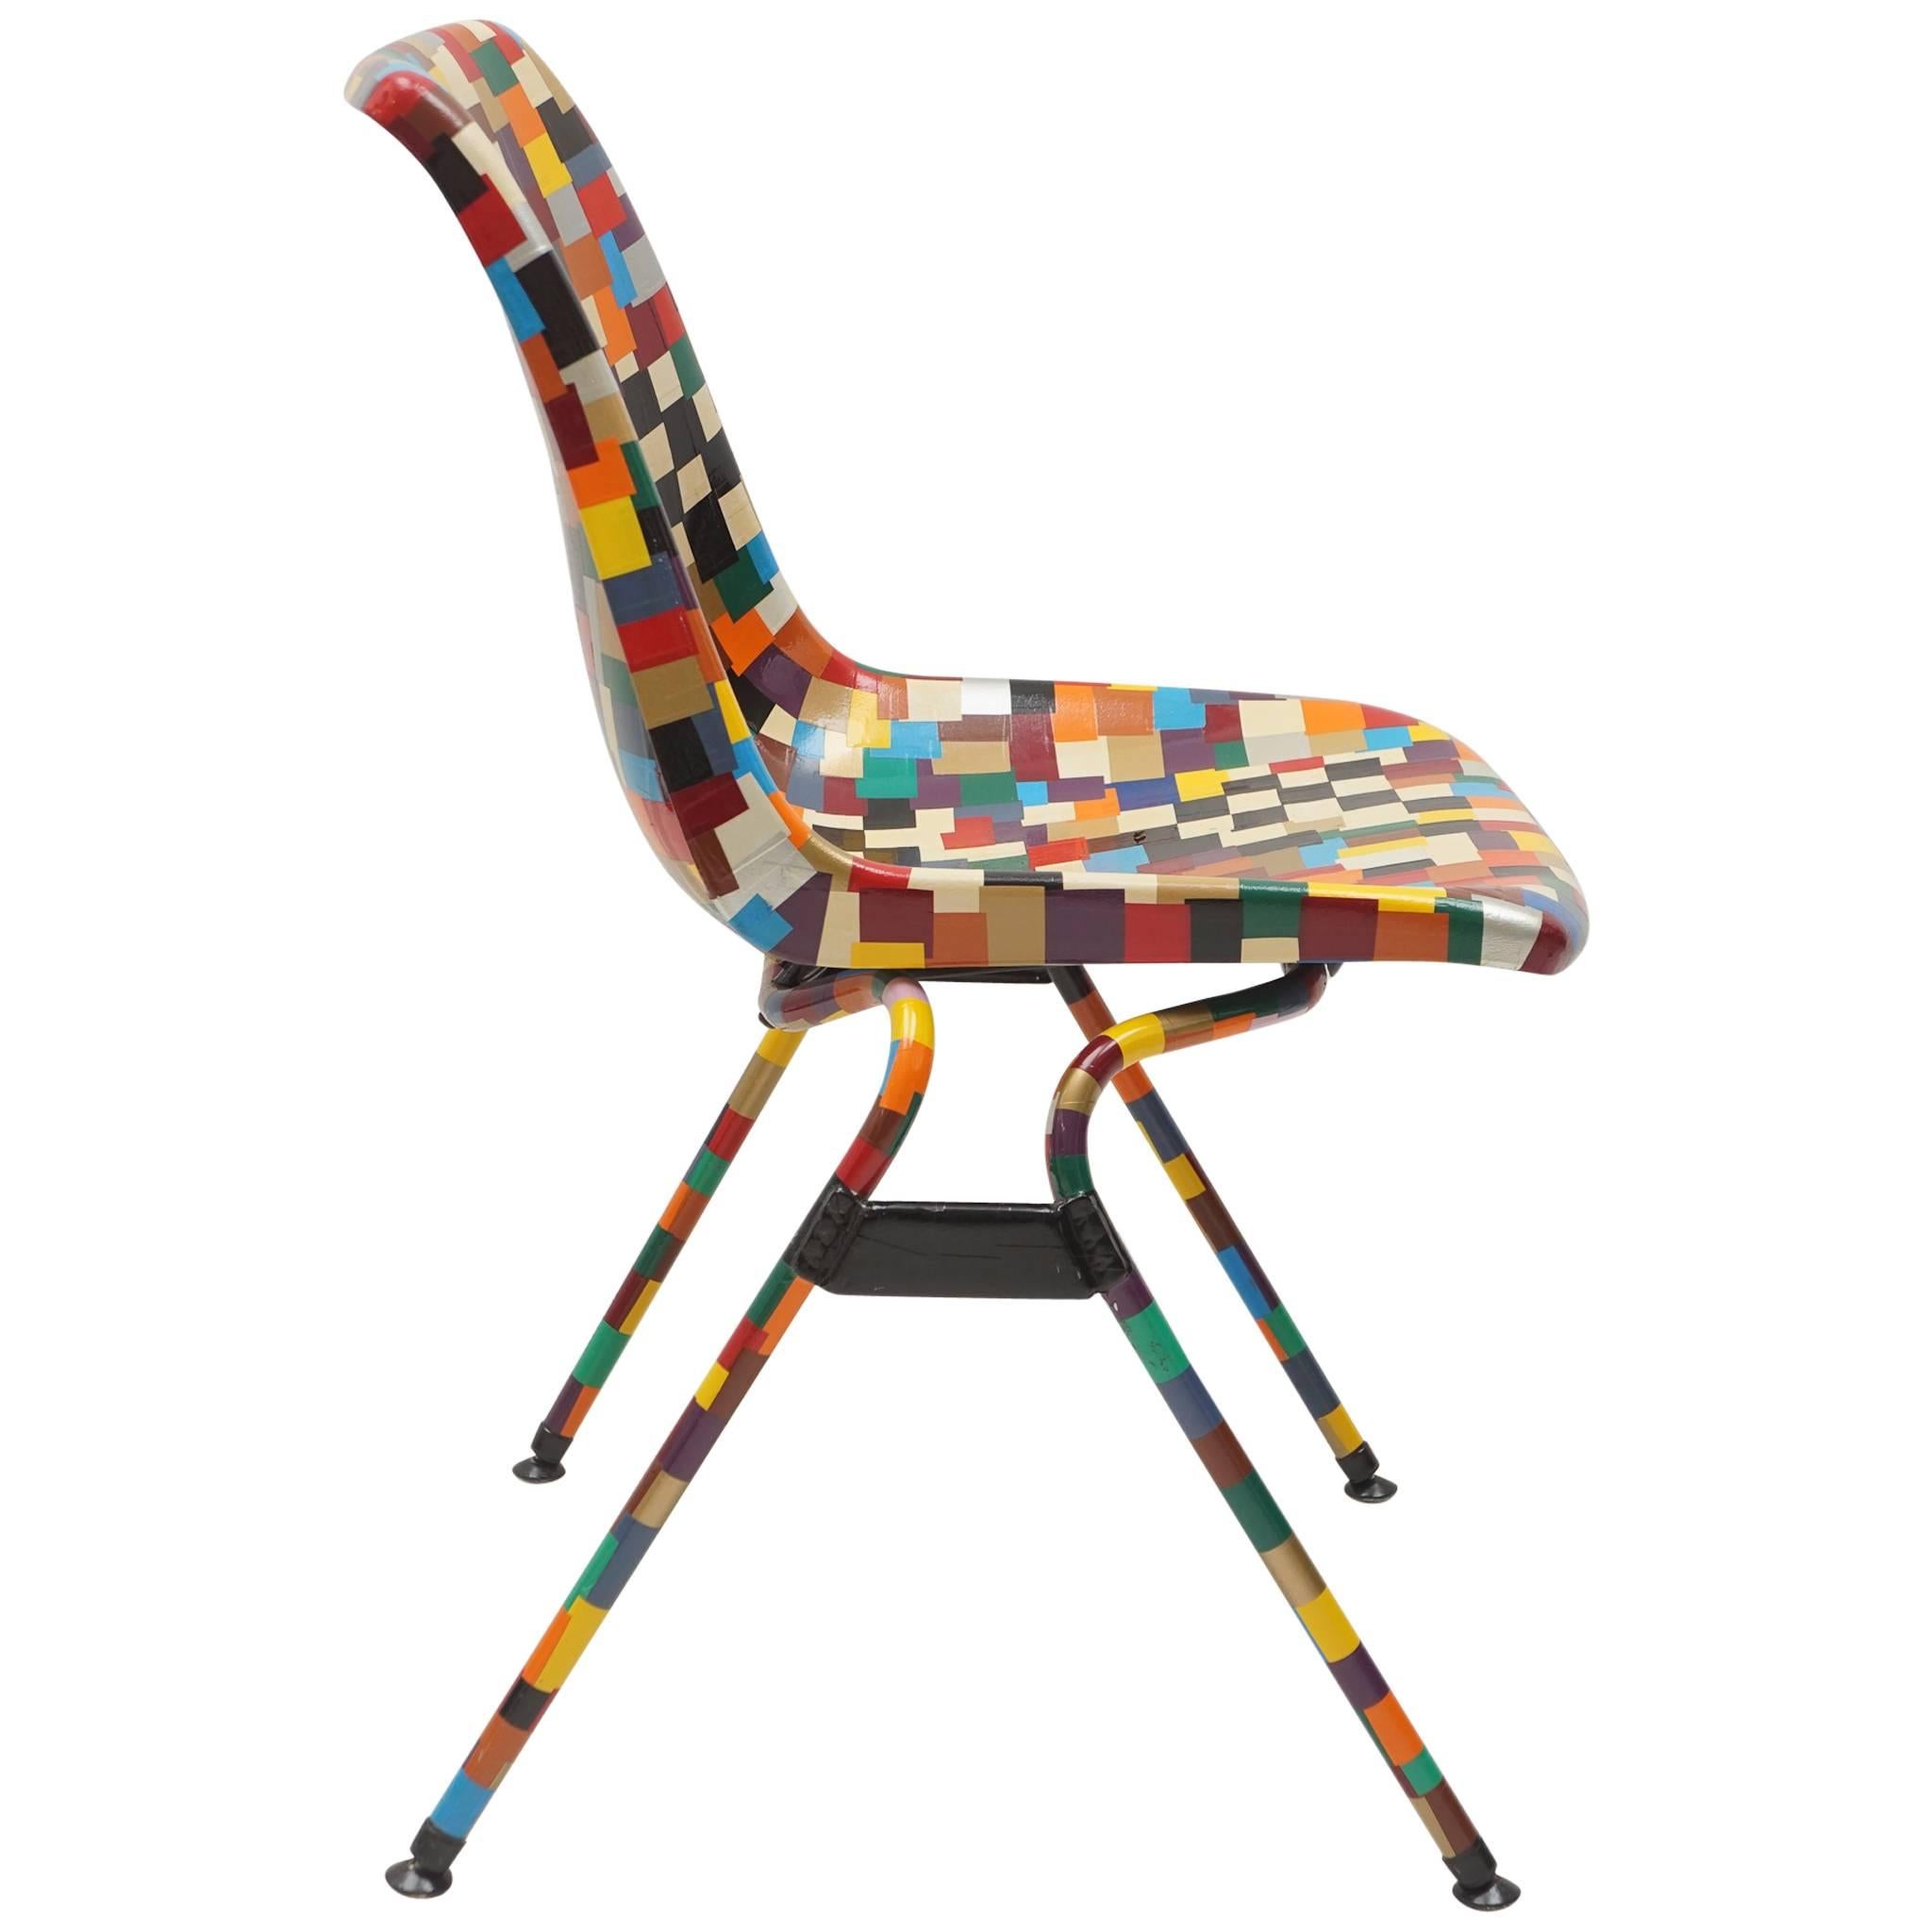 Multi-color decoupage chair in mosaic pattern with metal tubular legs.